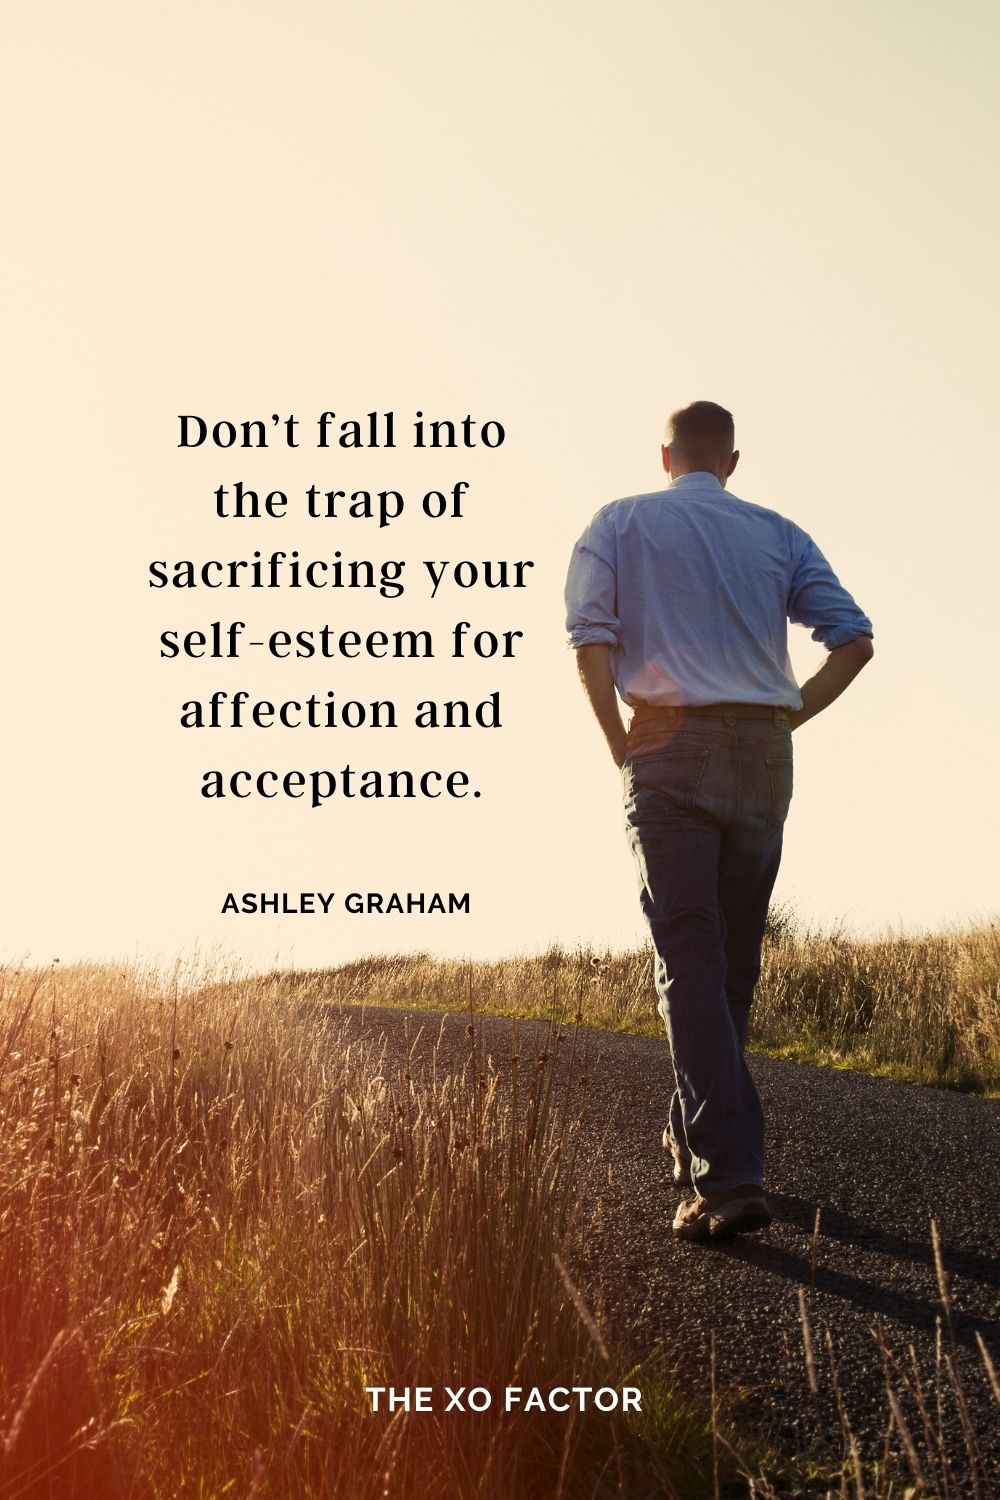 Don’t fall into the trap of sacrificing your self-esteem for affection and acceptance. Ashley Graham